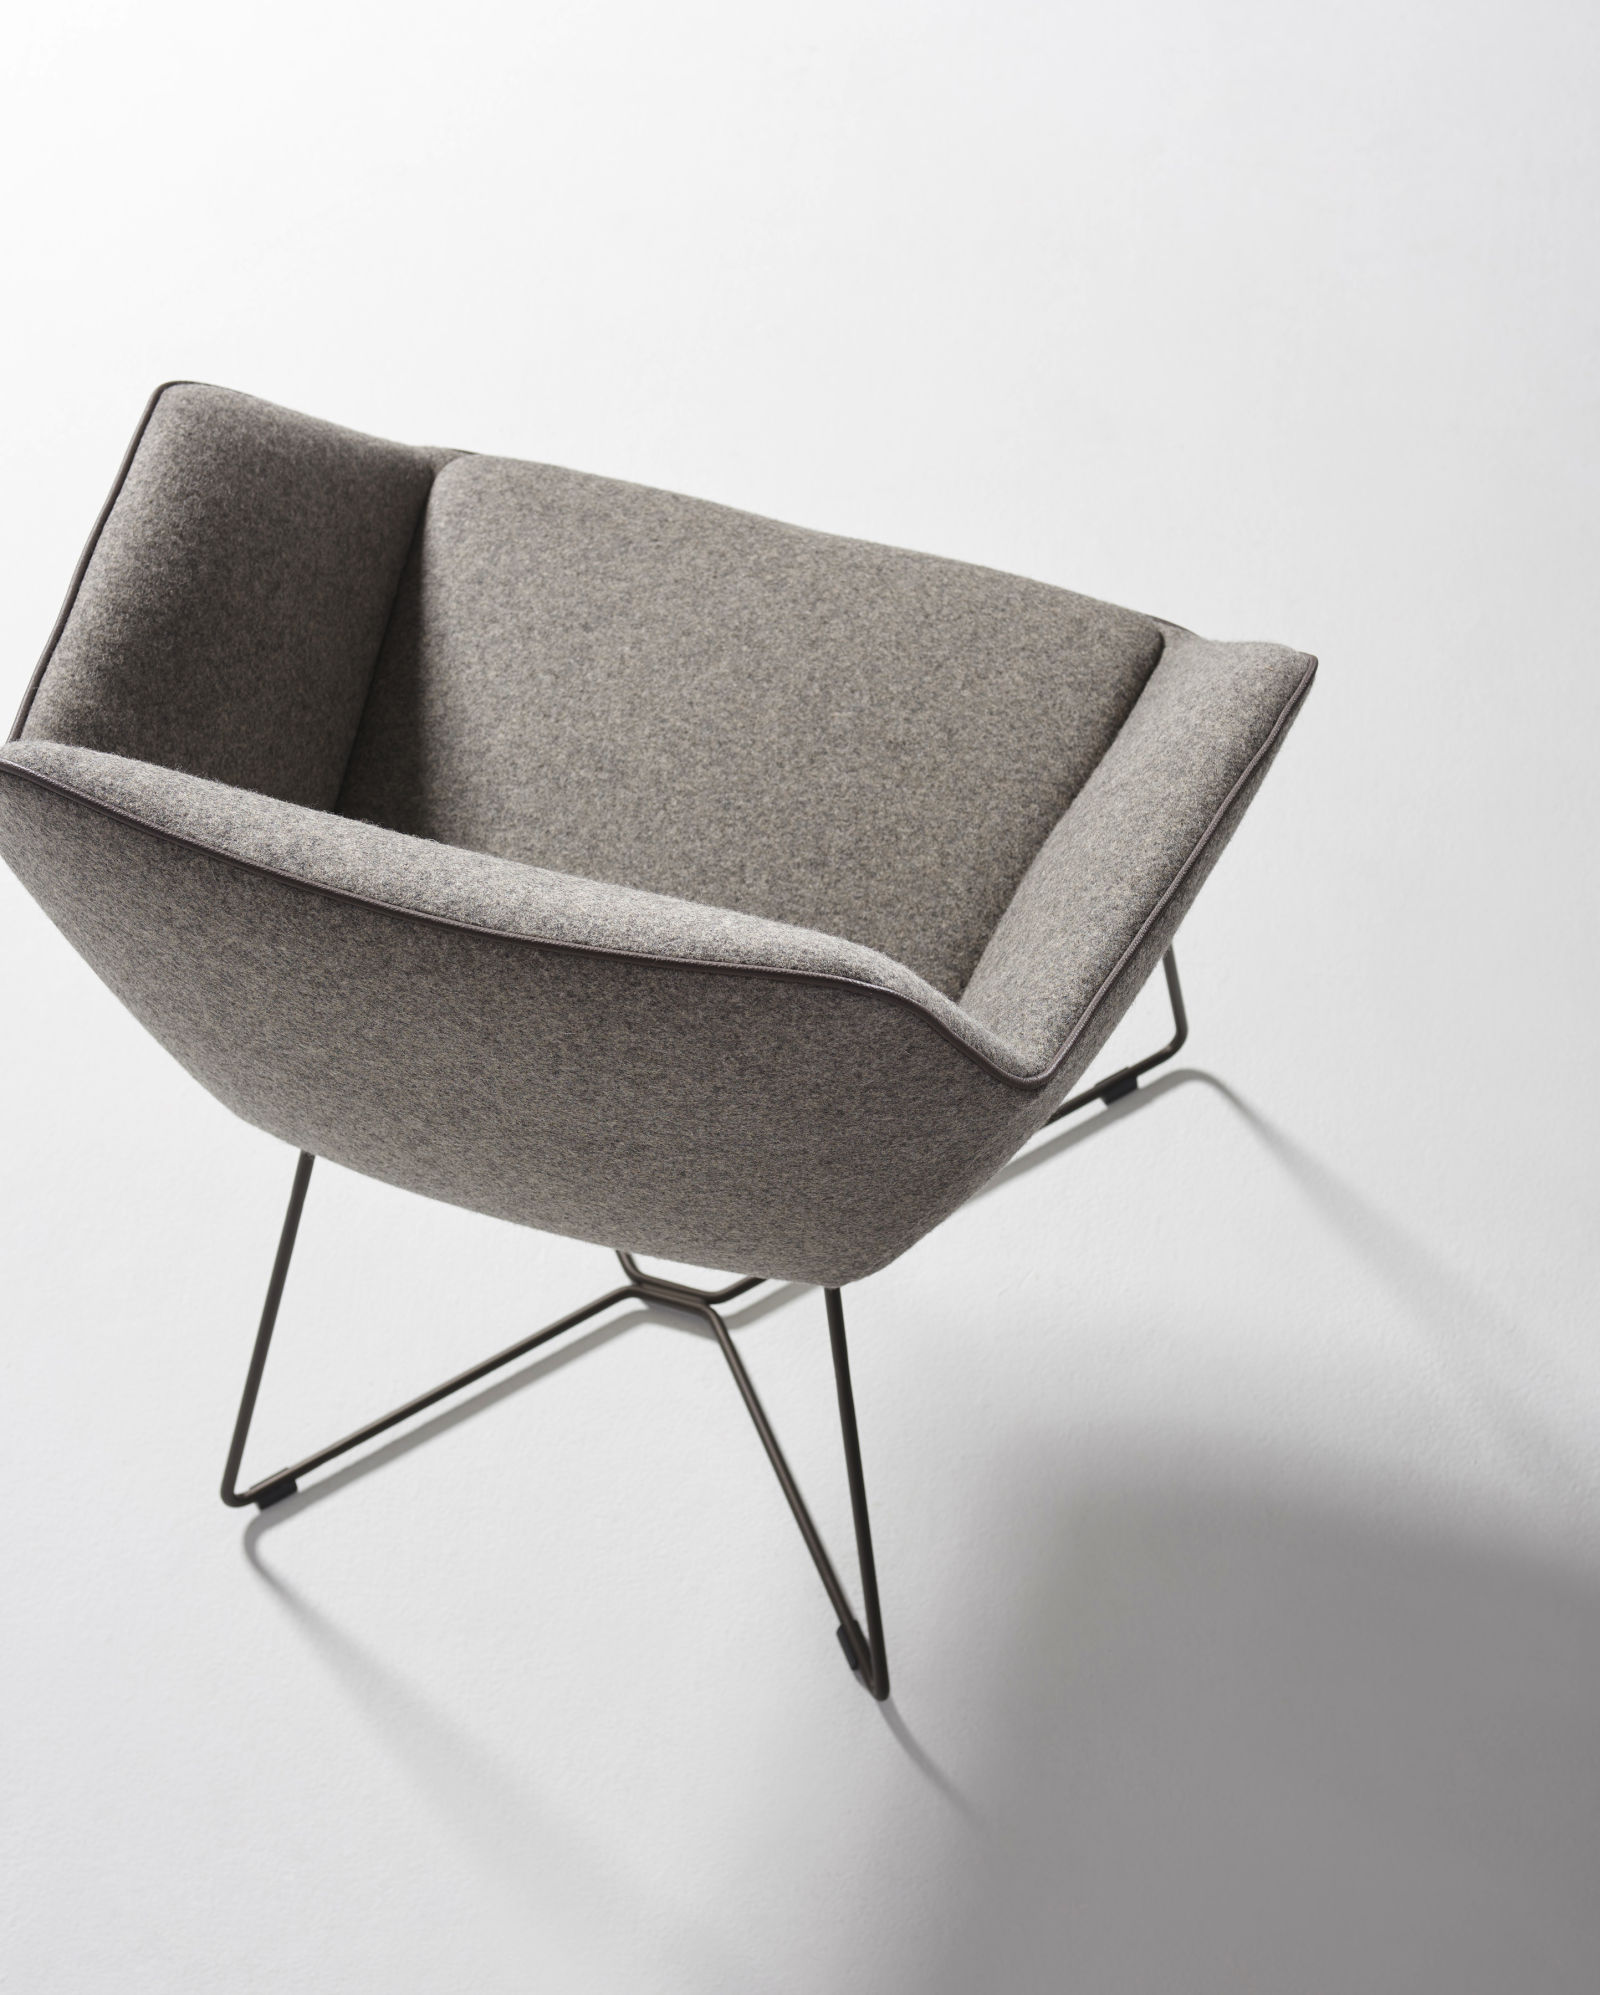 Sachet by Davis Furniture: High Style for your Workspace